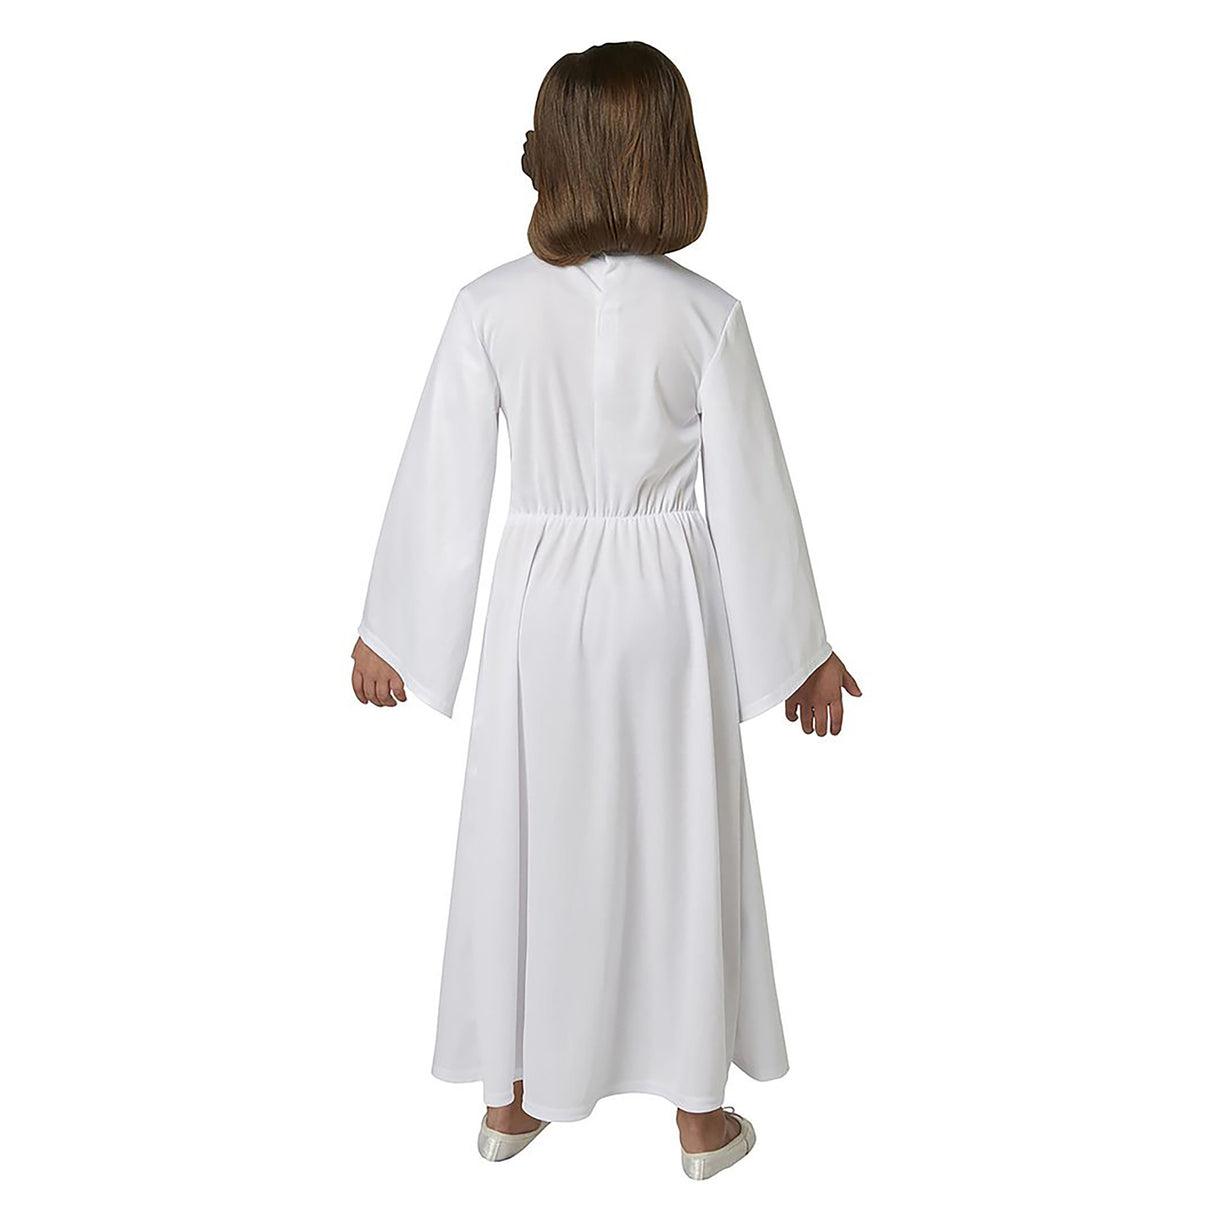 Rubies Star Wars Princess Leia Deluxe Child Costume, White (3-4 years)